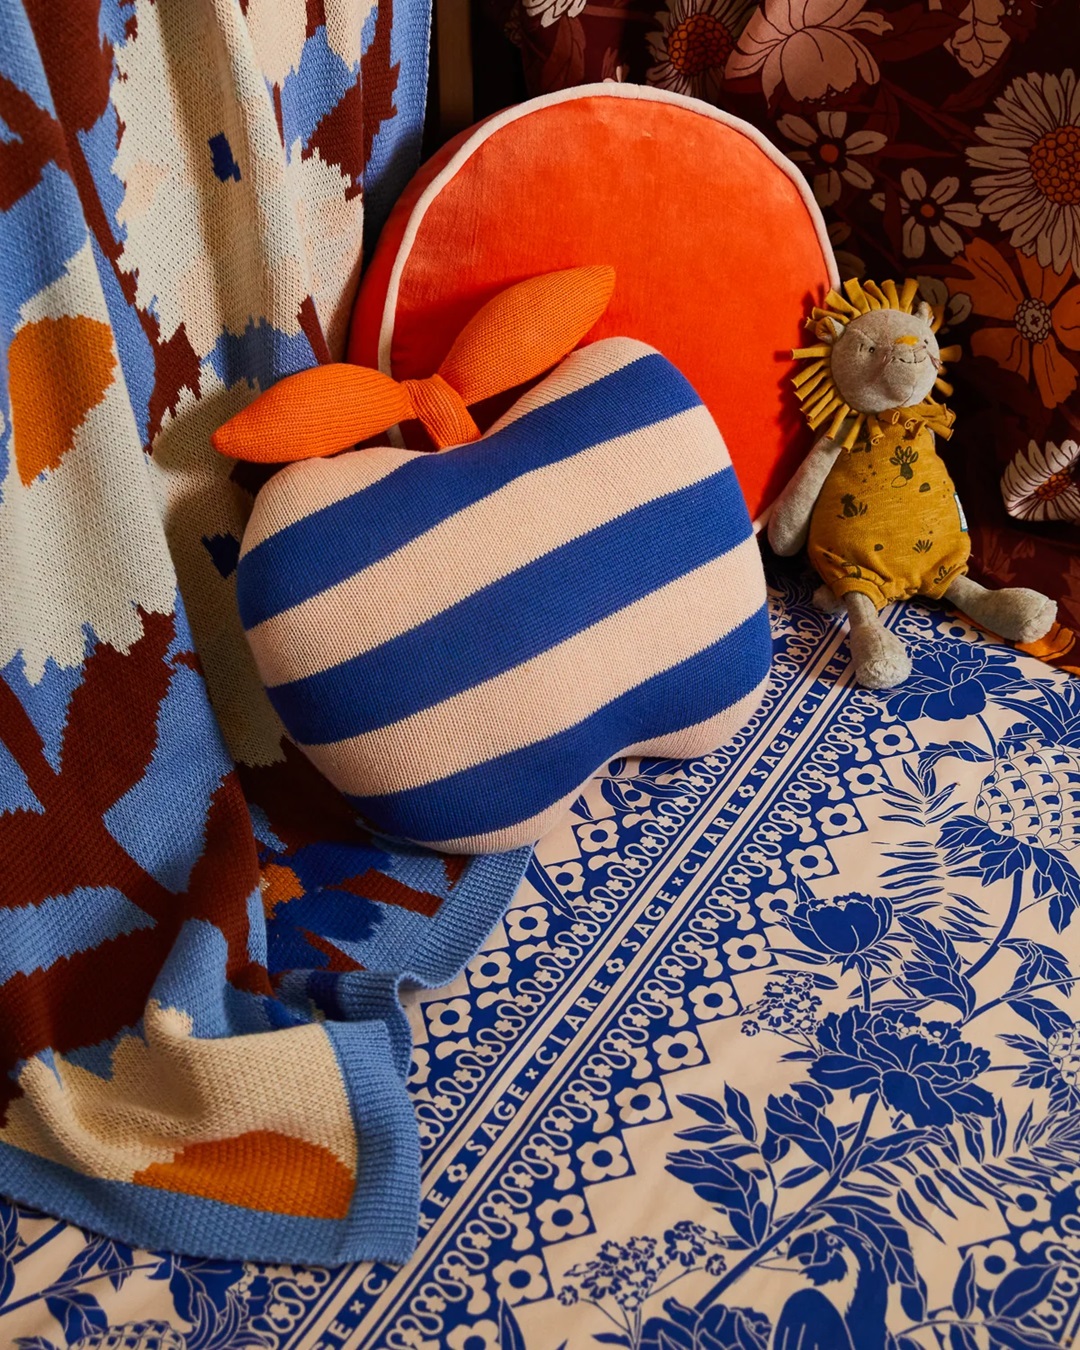 White and blue stripe apple cushion with orange leaves on floor with blue carpet and other cushions